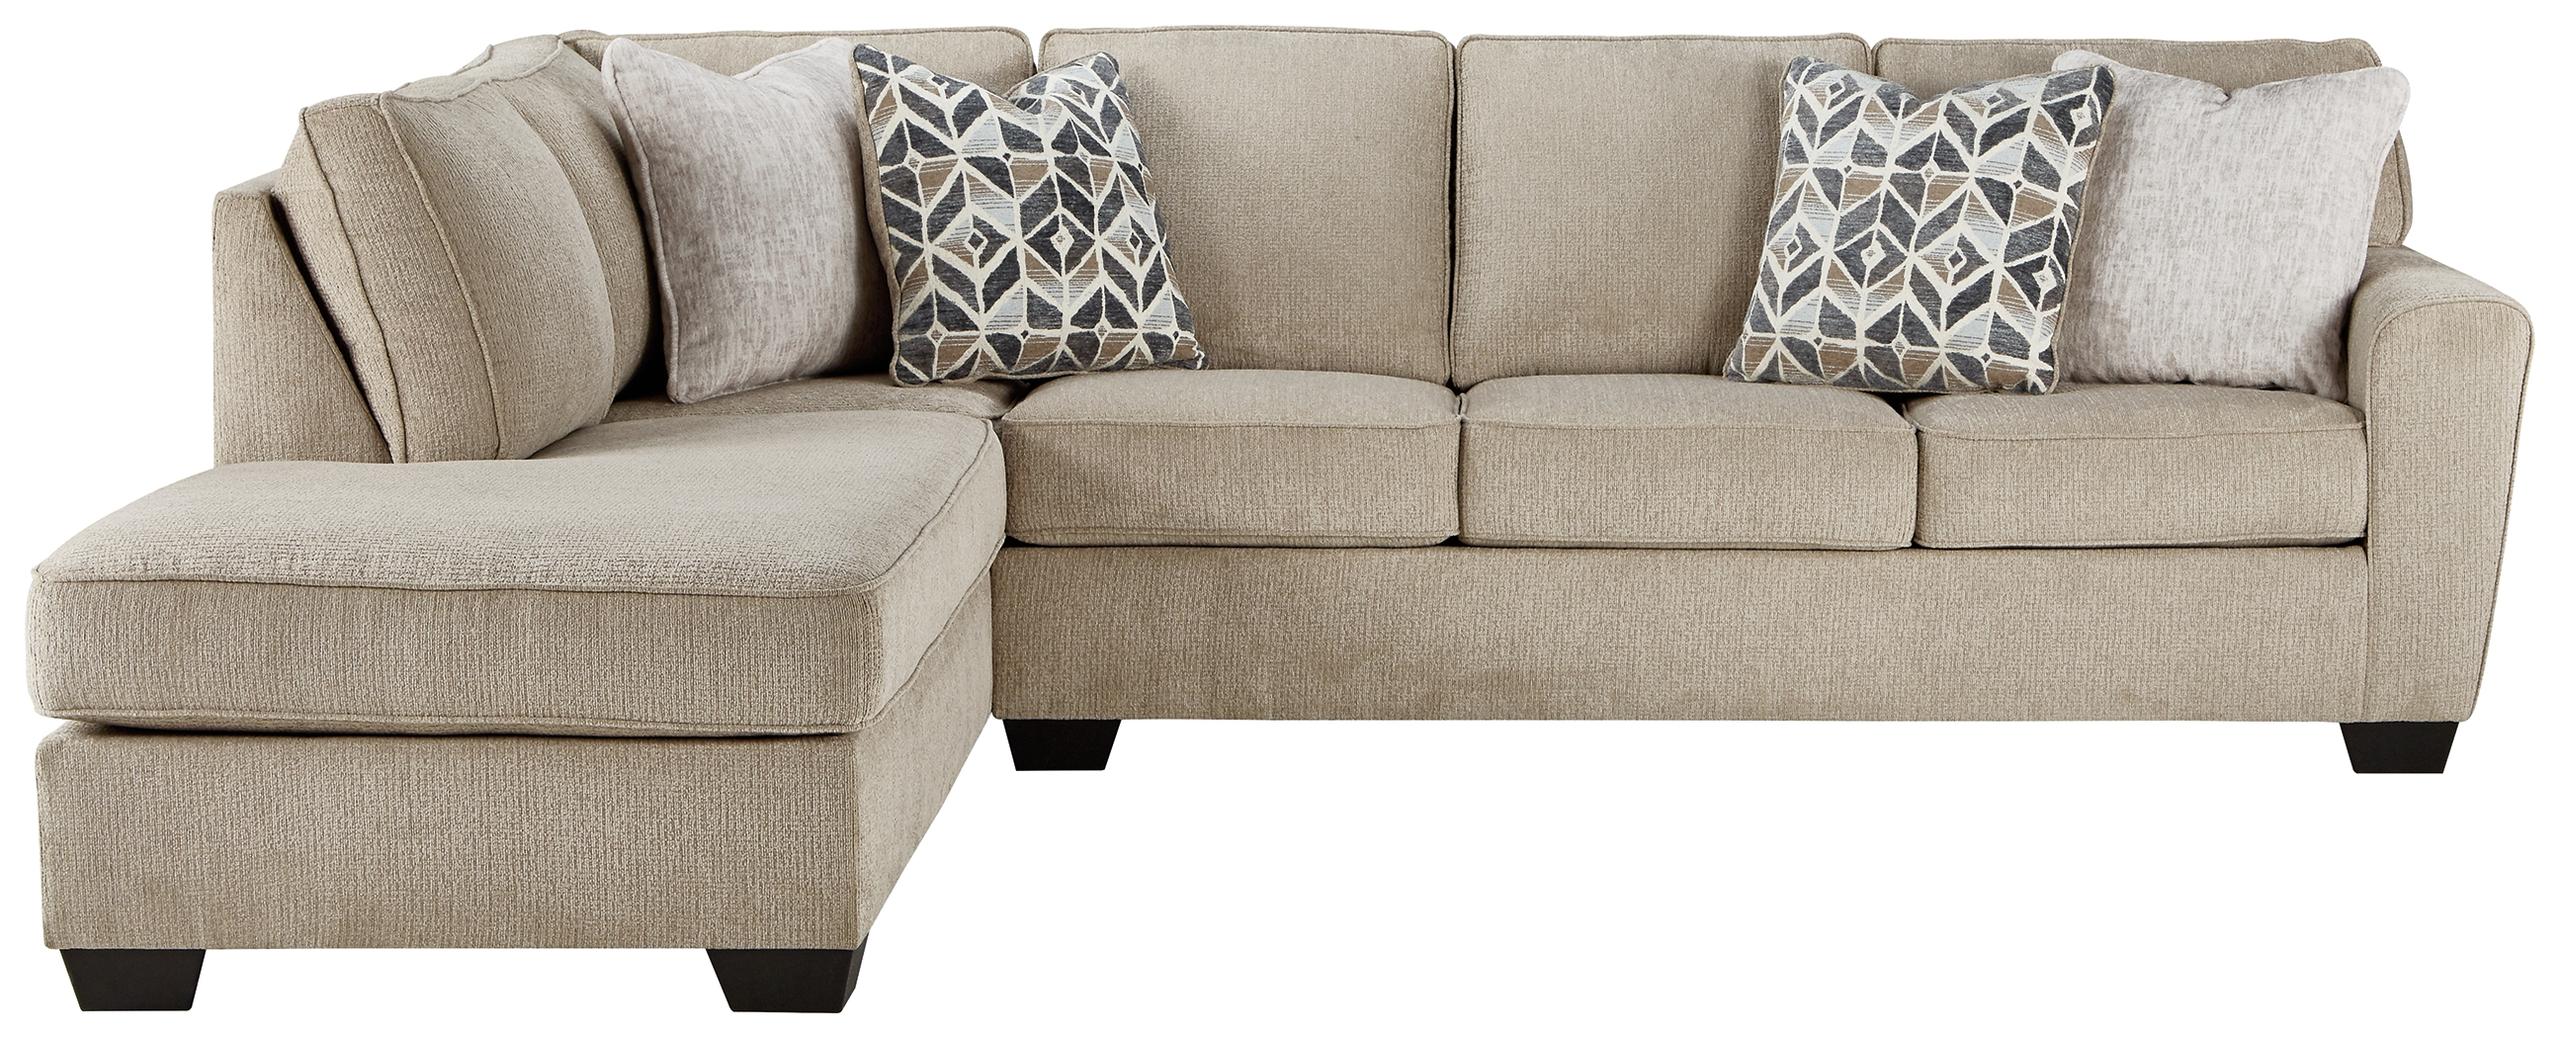 ASHLEY FURNITURE 80305S1 Decelle 2-piece Sectional With Chaise